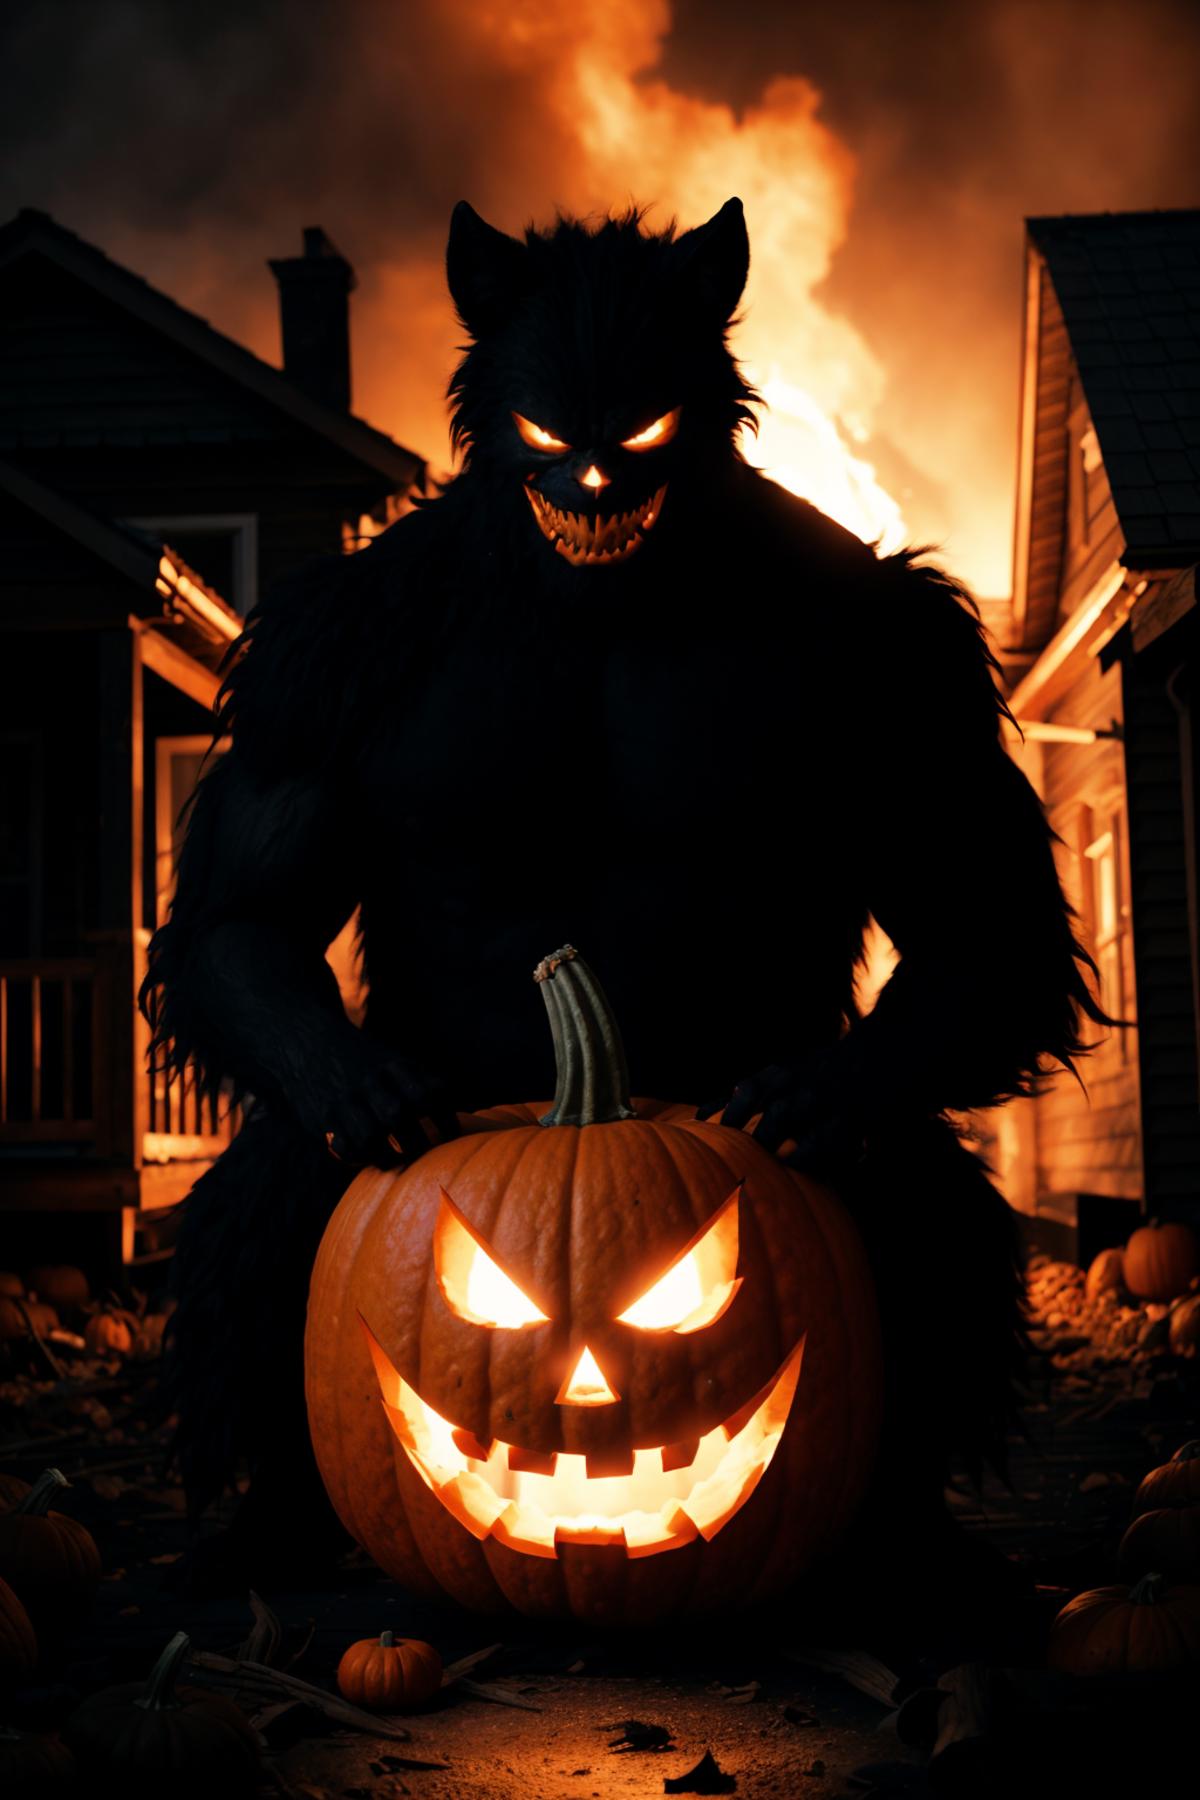 A werewolf holding a pumpkin in front of a burning house.